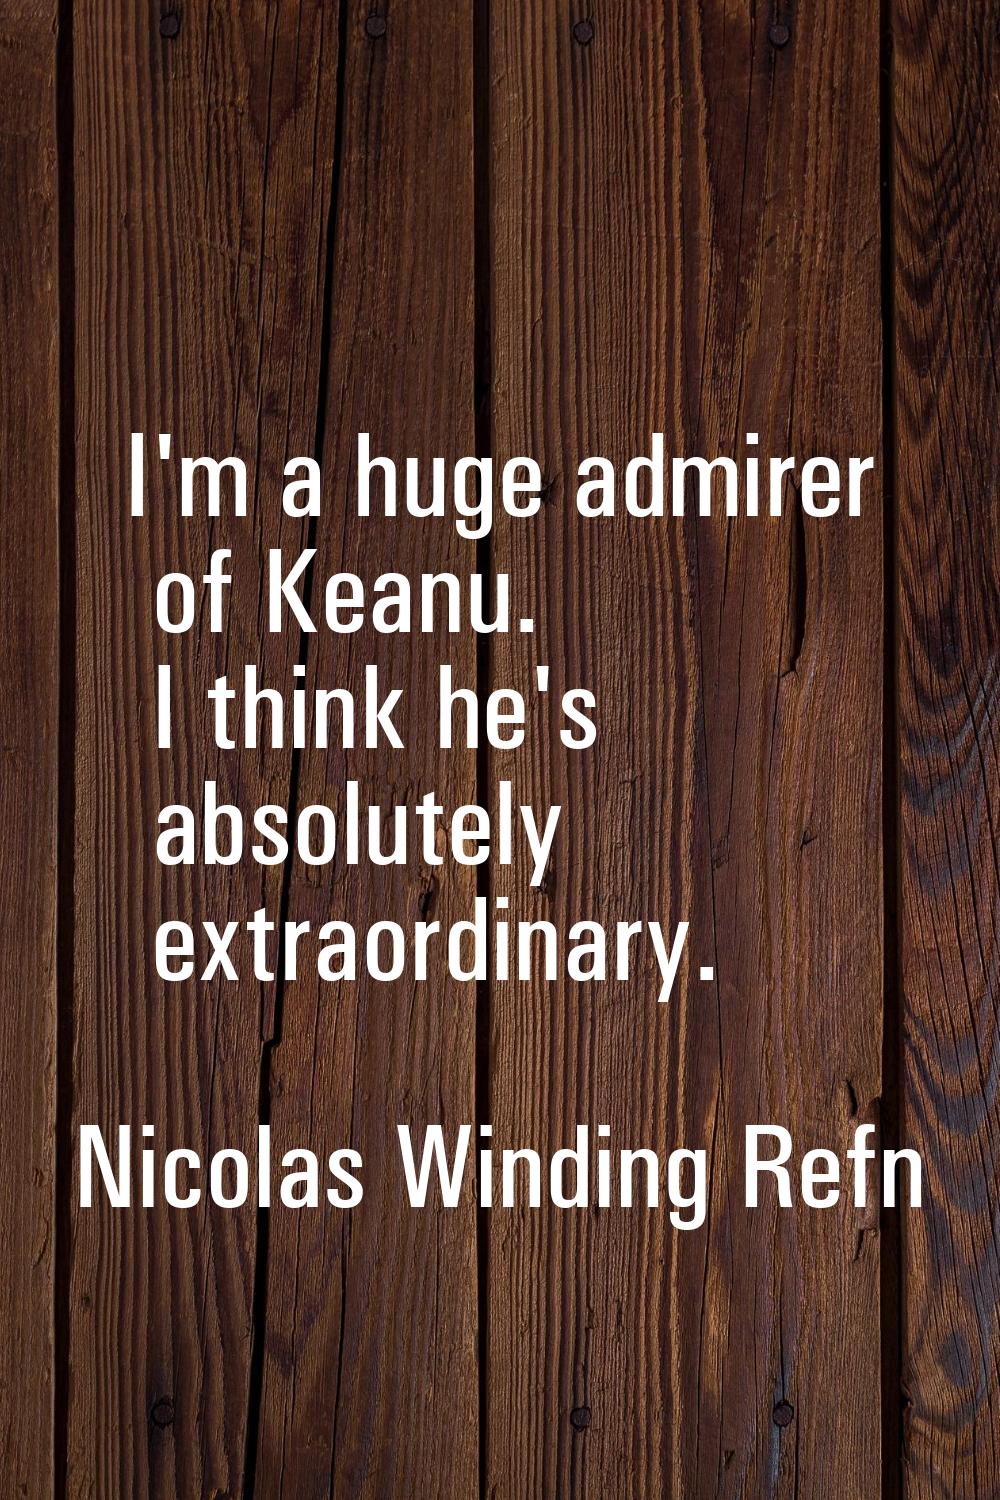 I'm a huge admirer of Keanu. I think he's absolutely extraordinary.